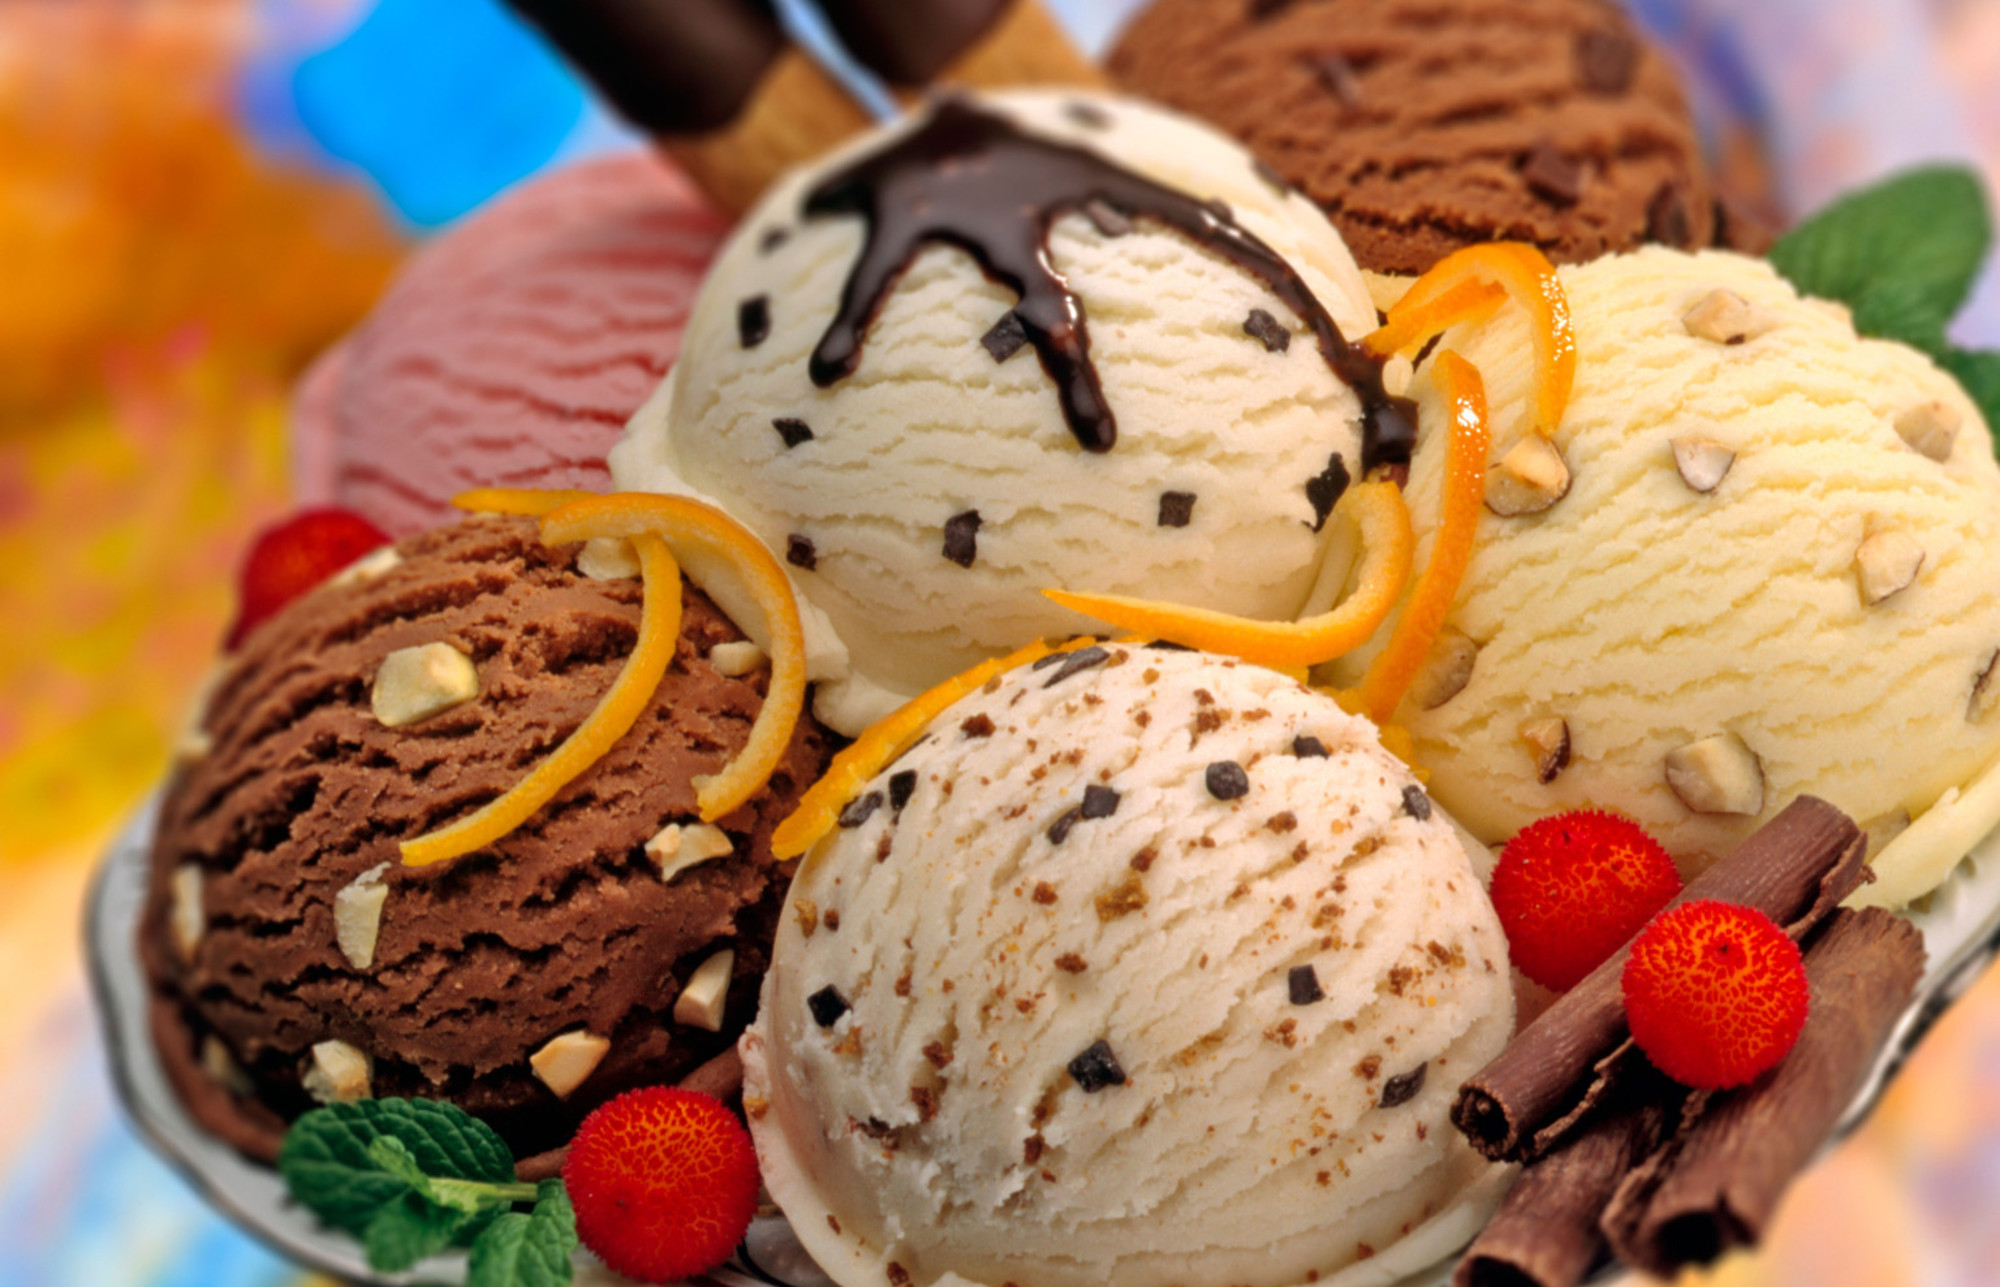 You probably abuse your ice cream. Here’s how to stop.